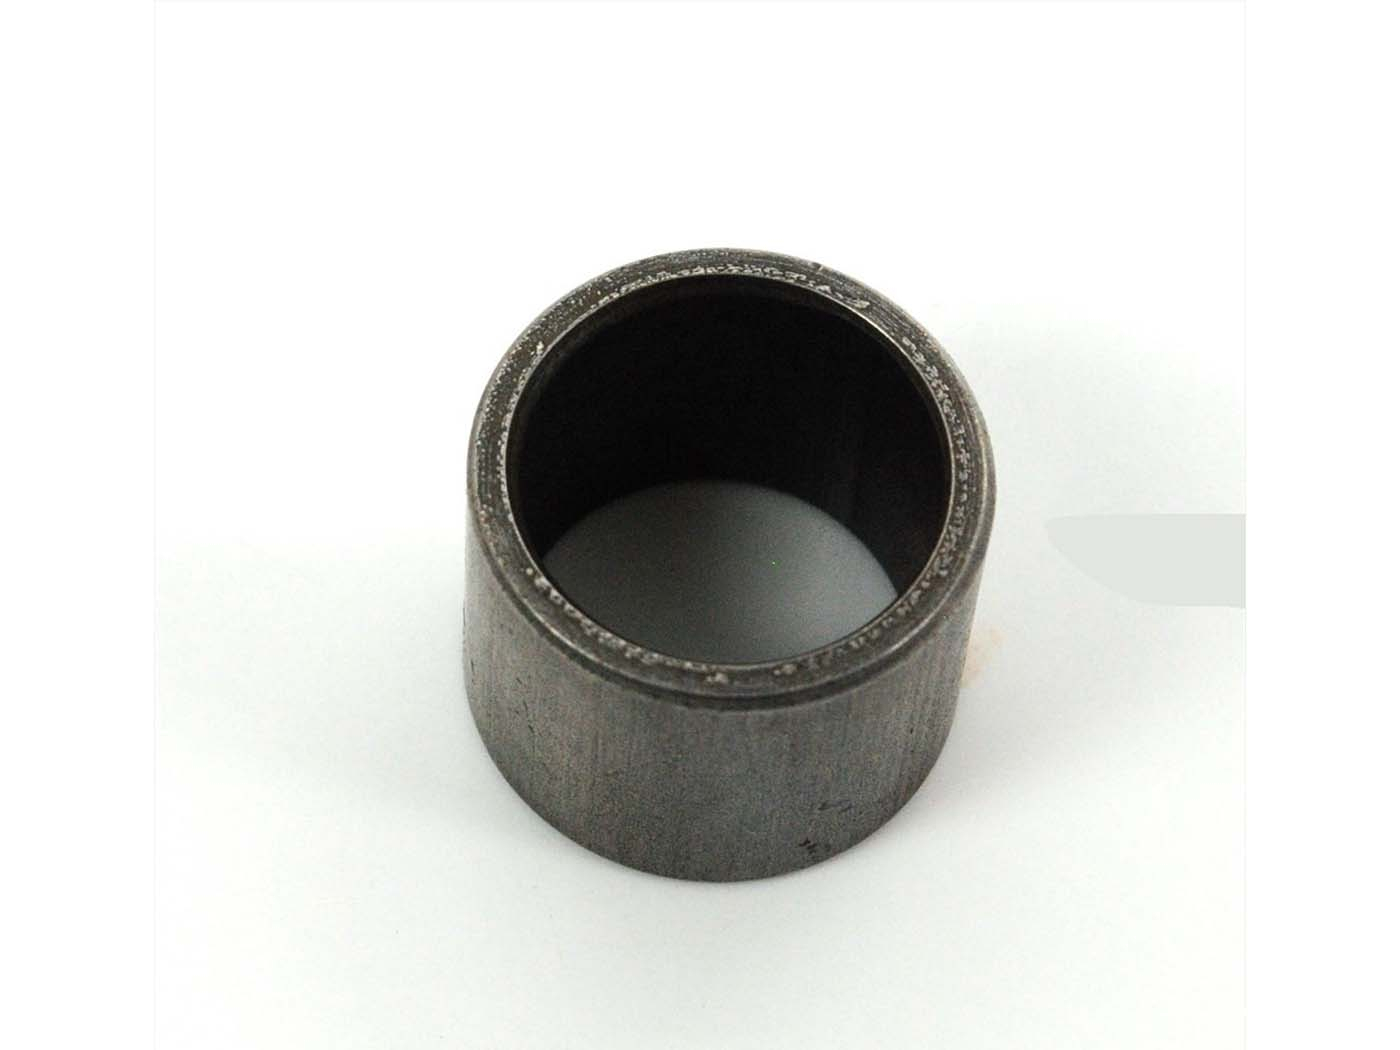 Main Shaft Bearing Bushing For Hercules Miele DKW Sachs 50/3 50/4 Engine 3 And 4 Speed